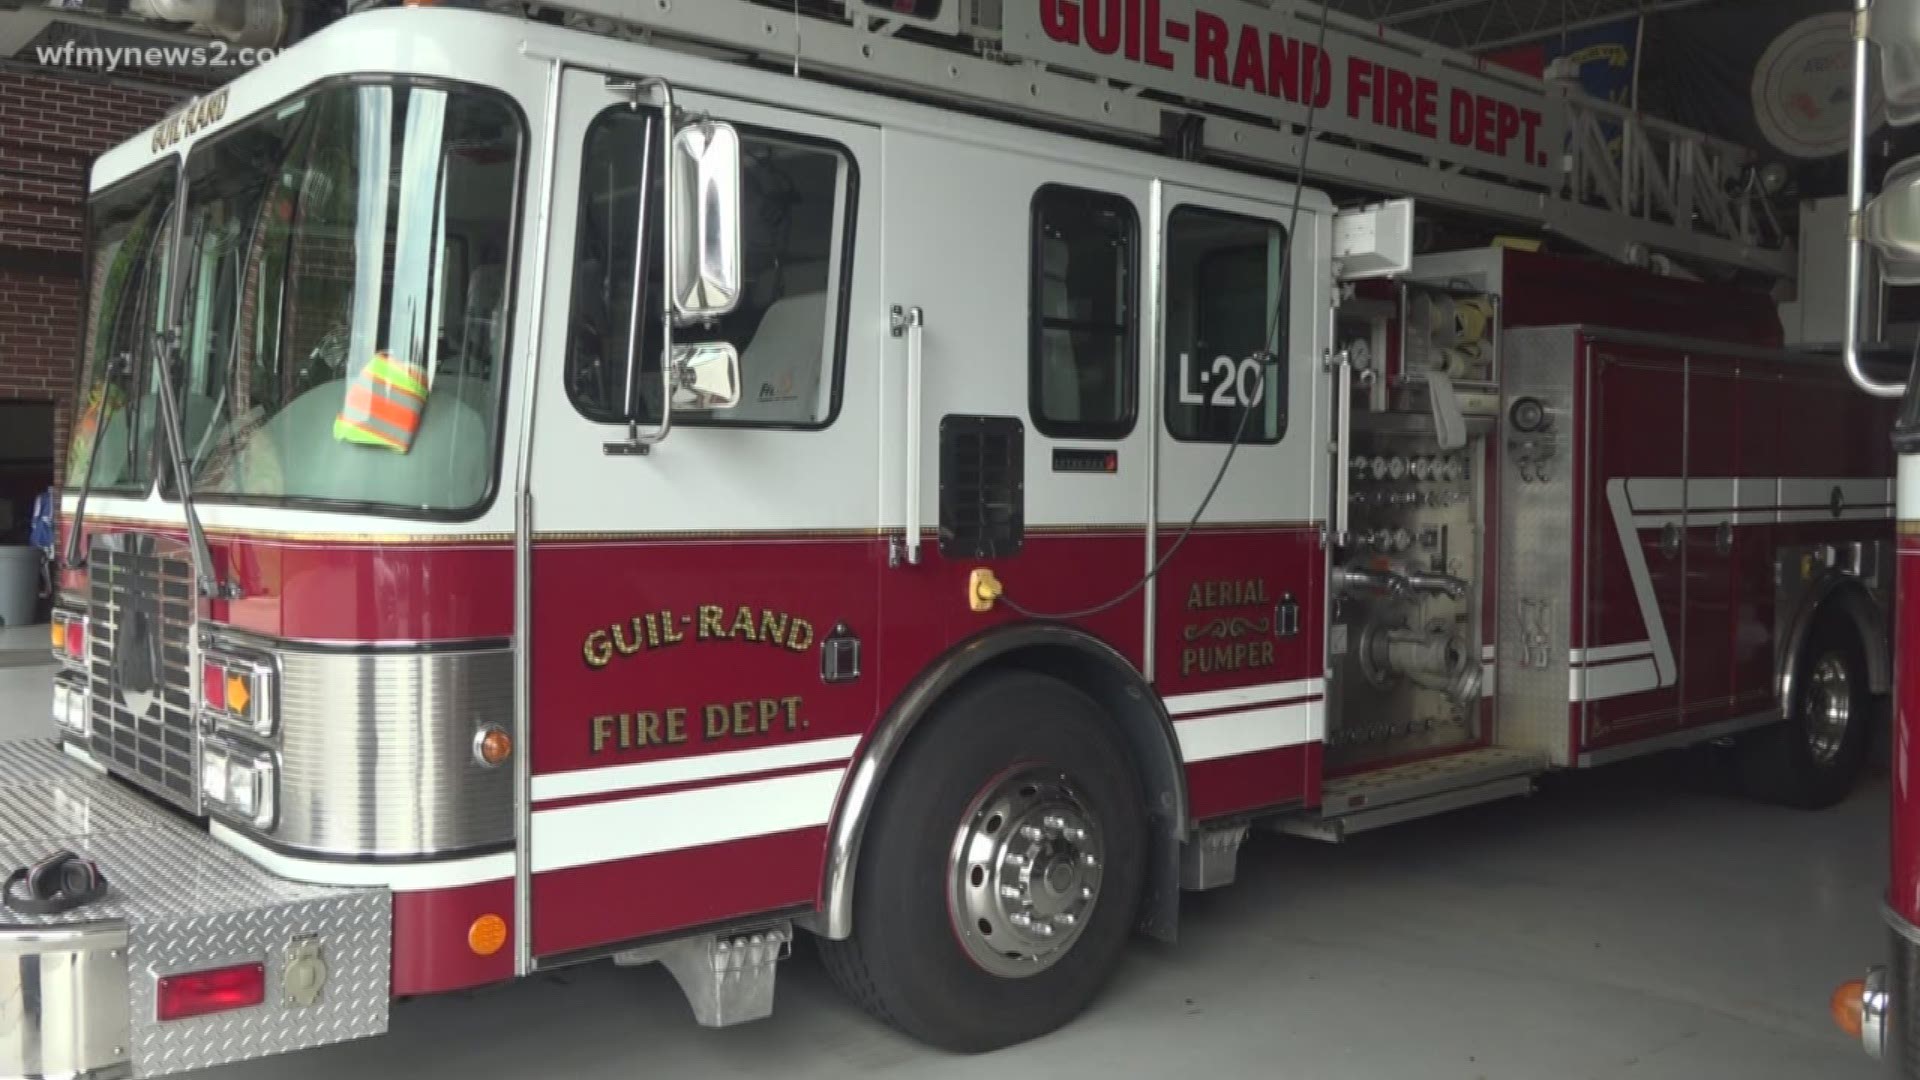 A Guil-Rand firefighter is in the hospital after being shocked from a downed power line in Randolph County, the fire department says.